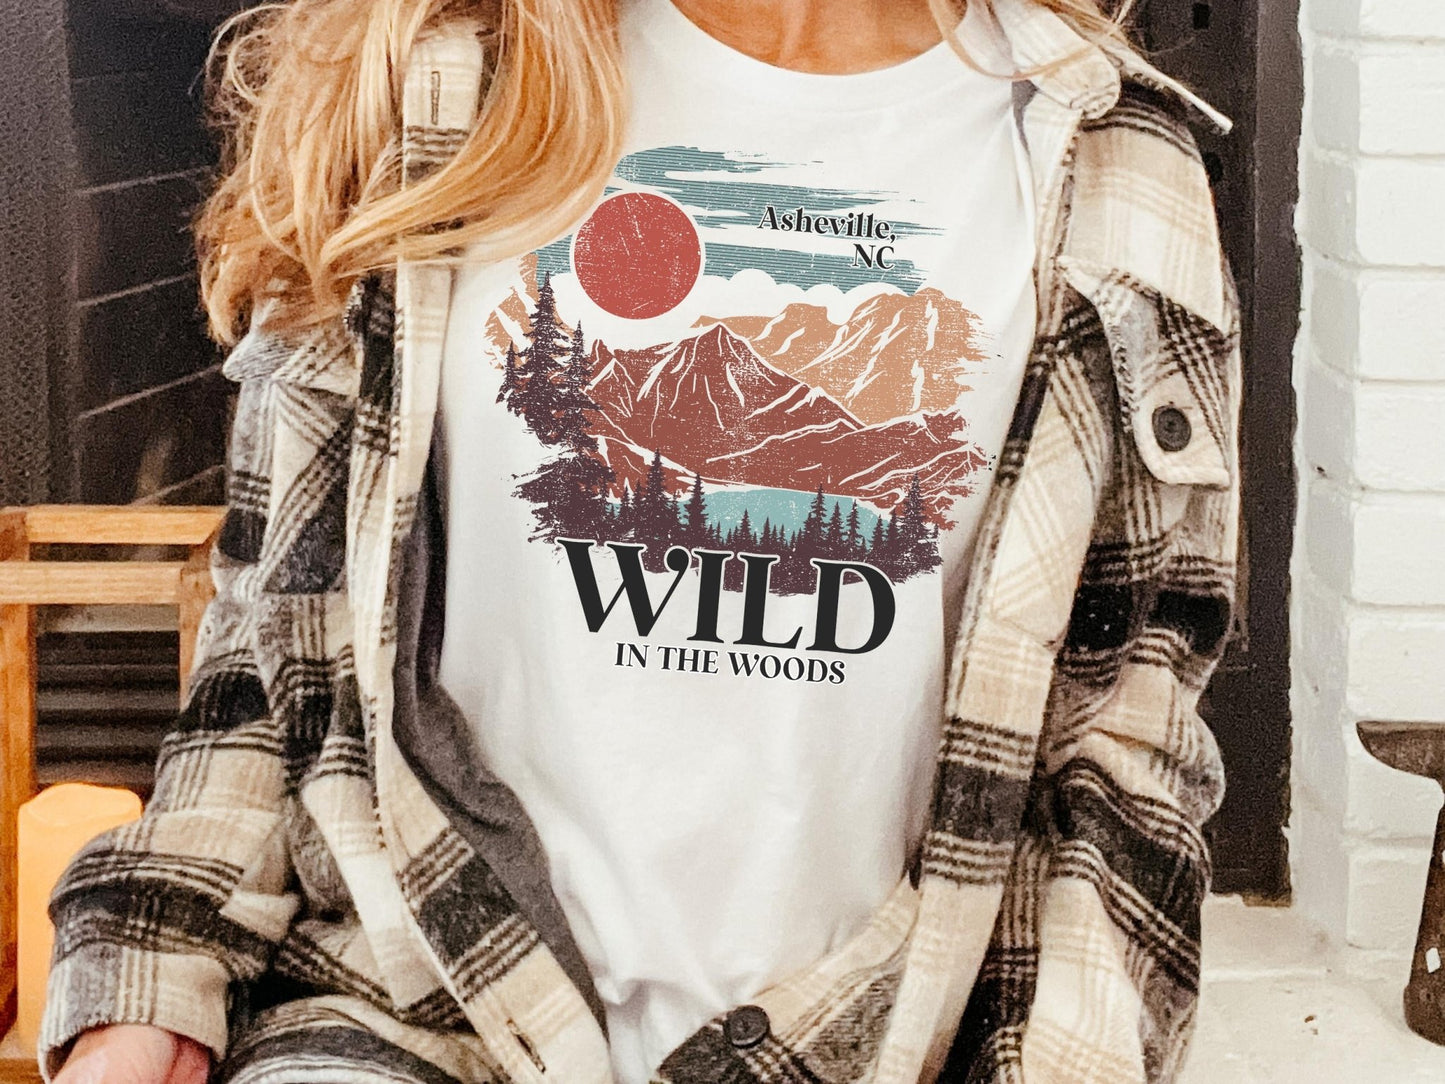 Wild in the Woods Bachelorette Shirts, Bridal Party in Asheville Shirts - Squishy Cheeks